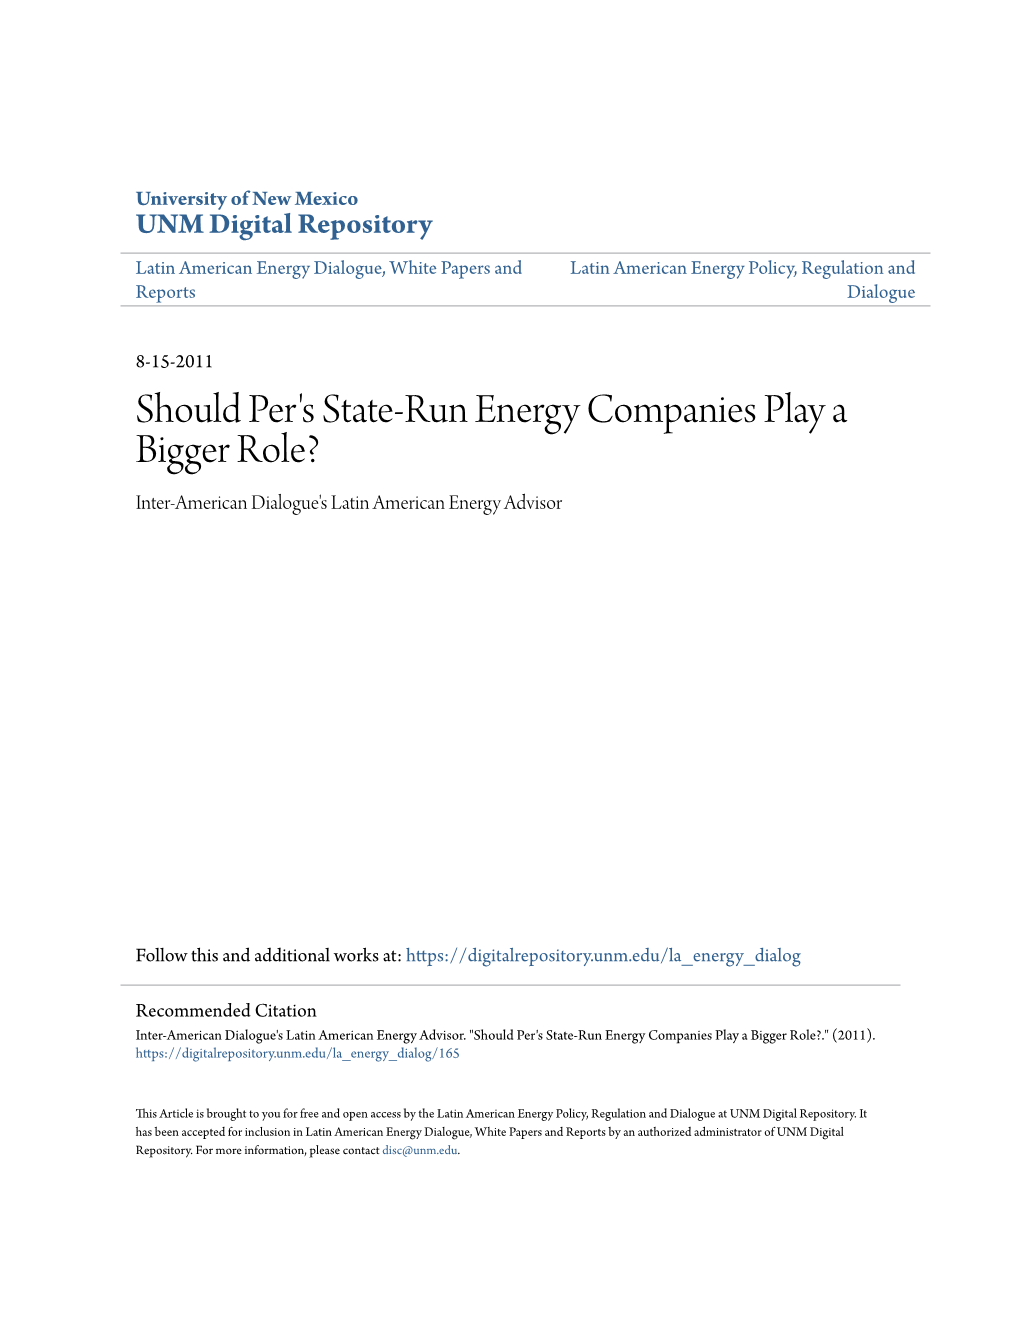 Should Per's State-Run Energy Companies Play a Bigger Role? Inter-American Dialogue's Latin American Energy Advisor